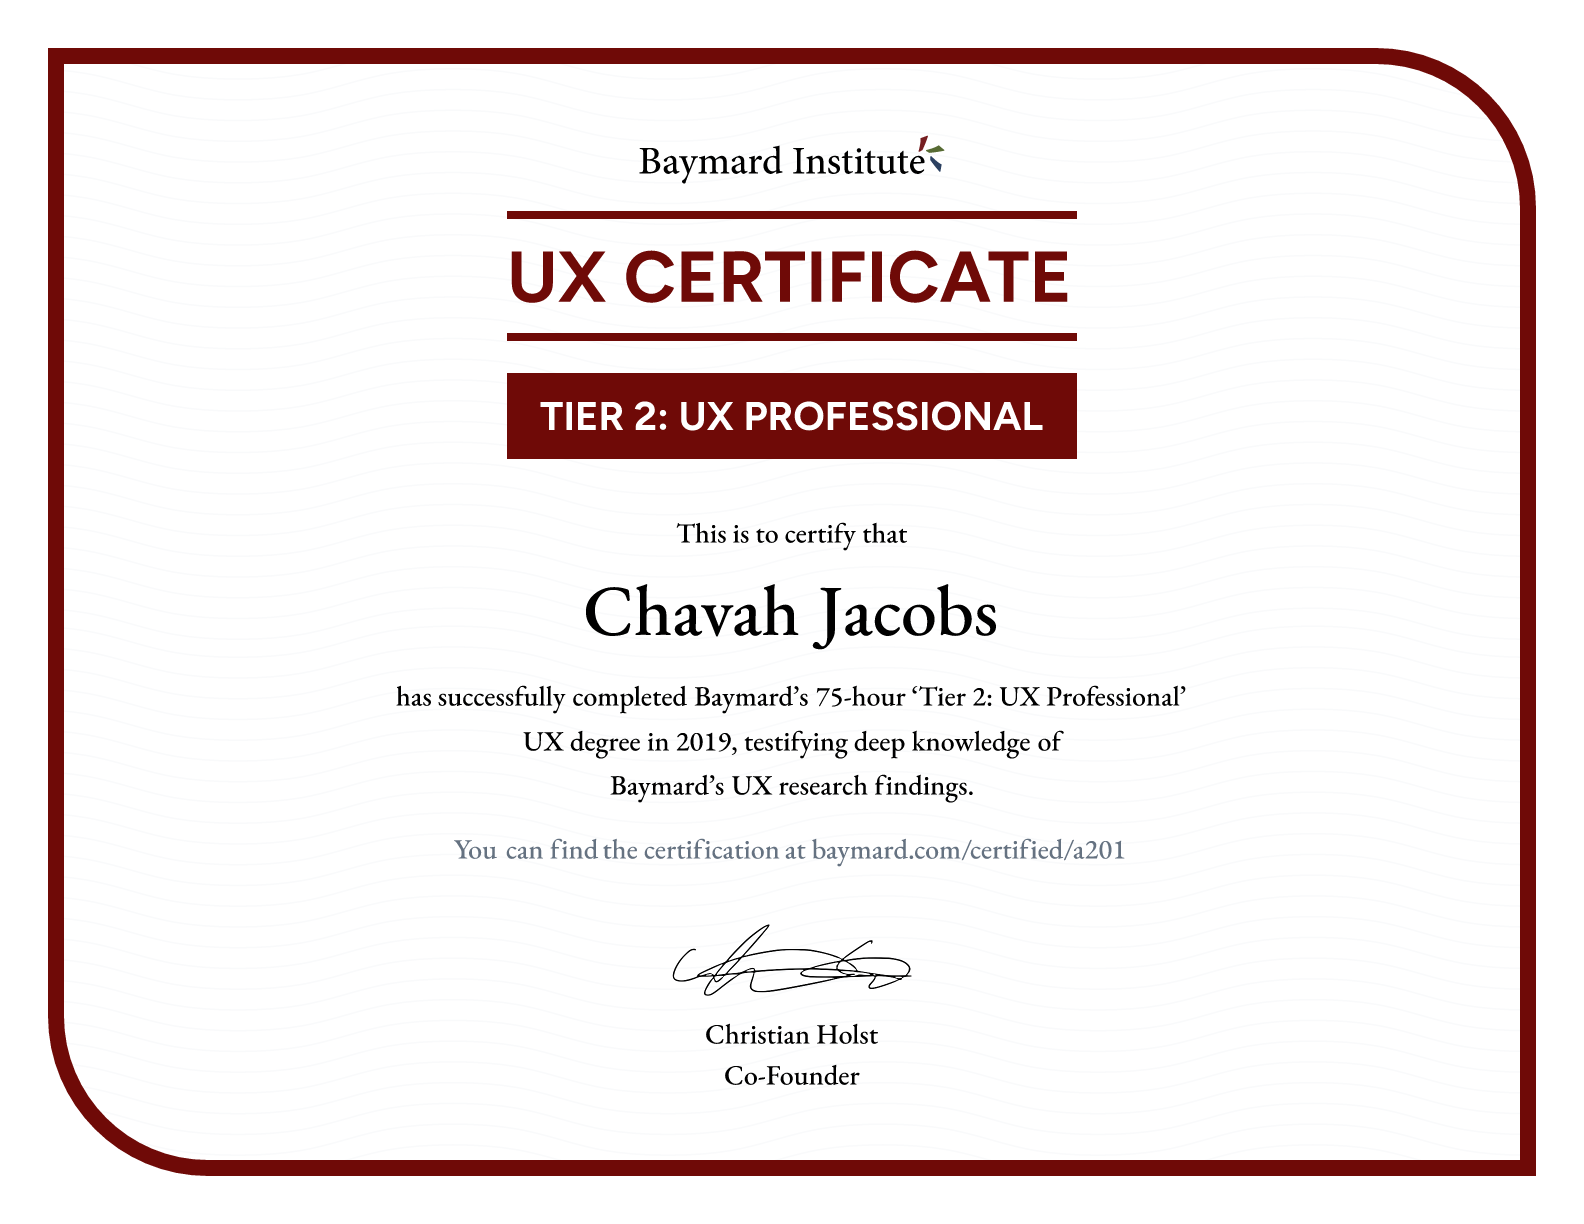 Chavah Jacobs’s certificate